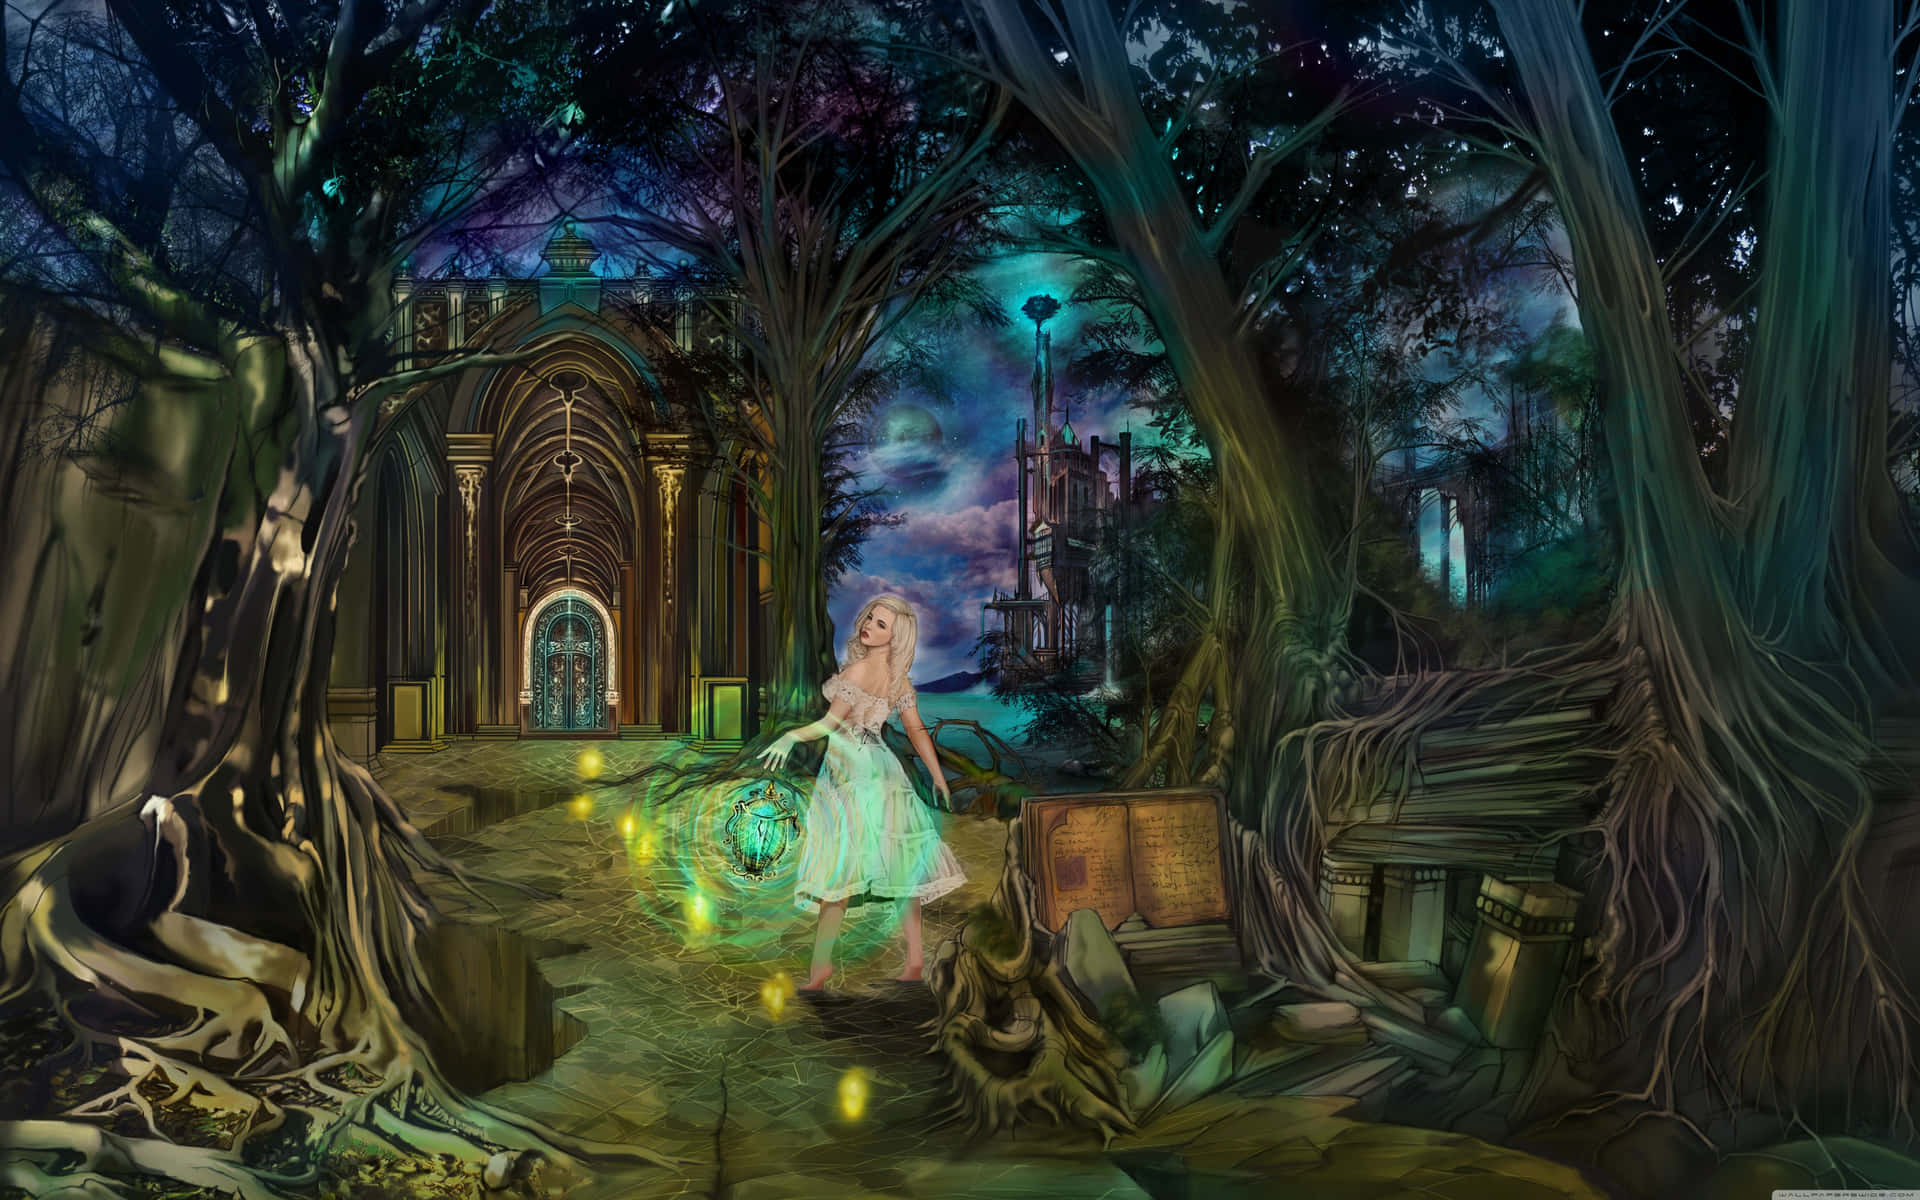 "Once upon a time in a magical kingdom" Wallpaper